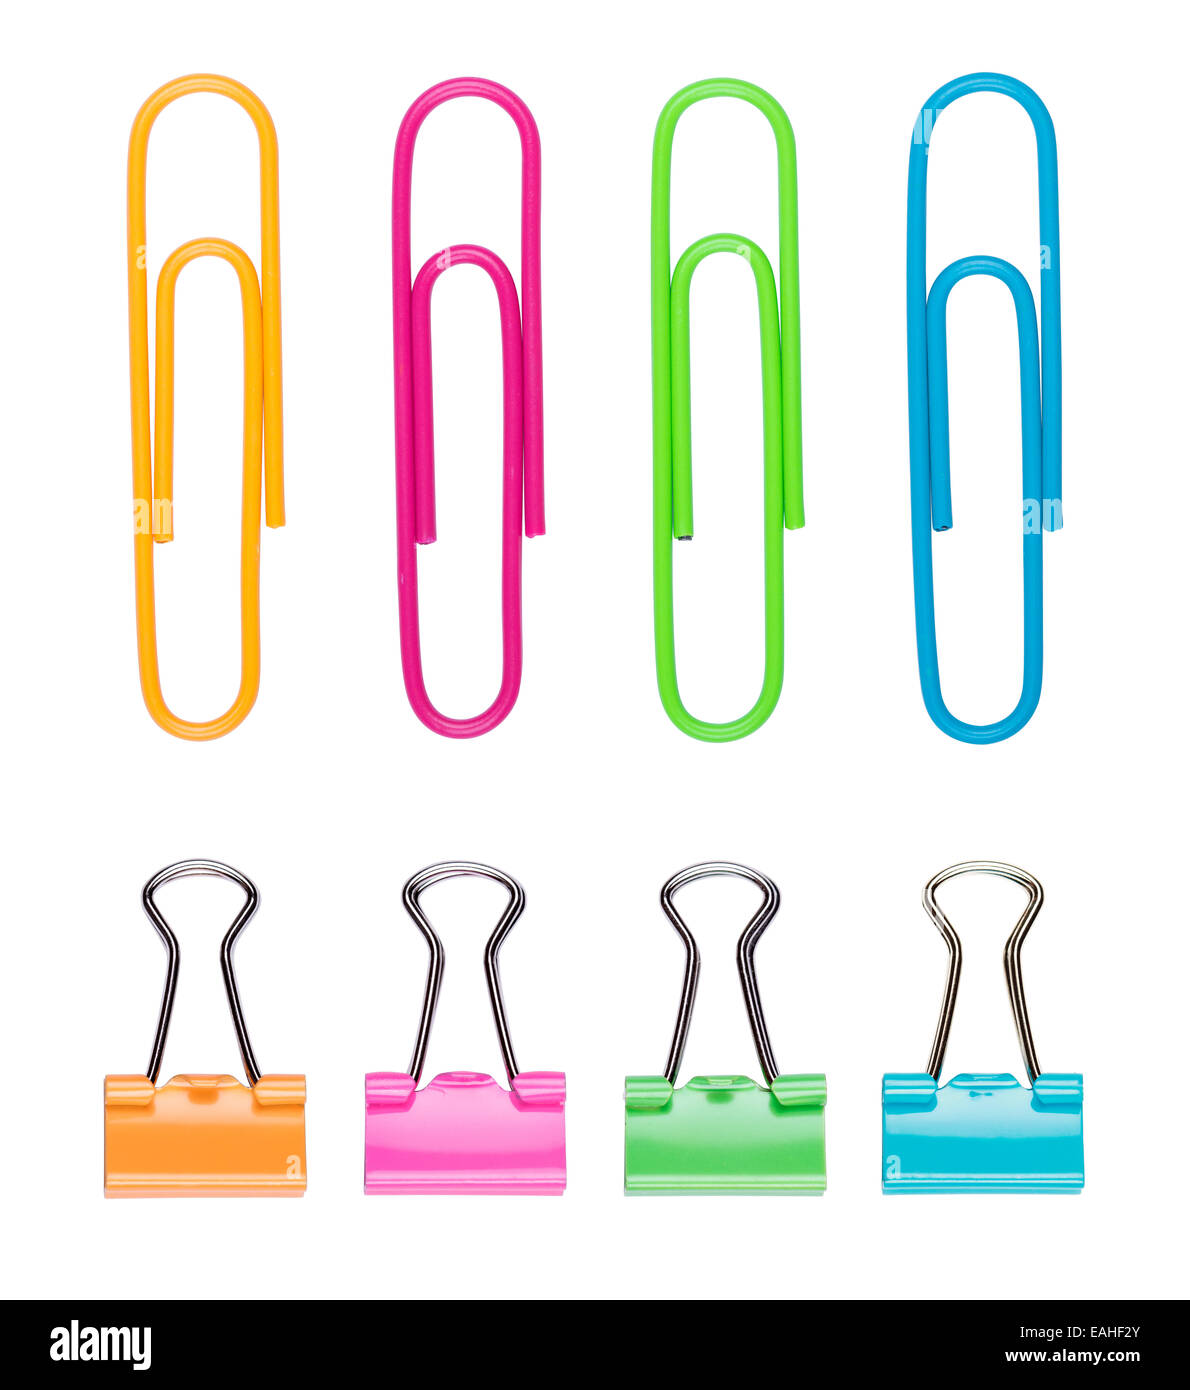 Colorful paper clips Stock Photo - Alamy